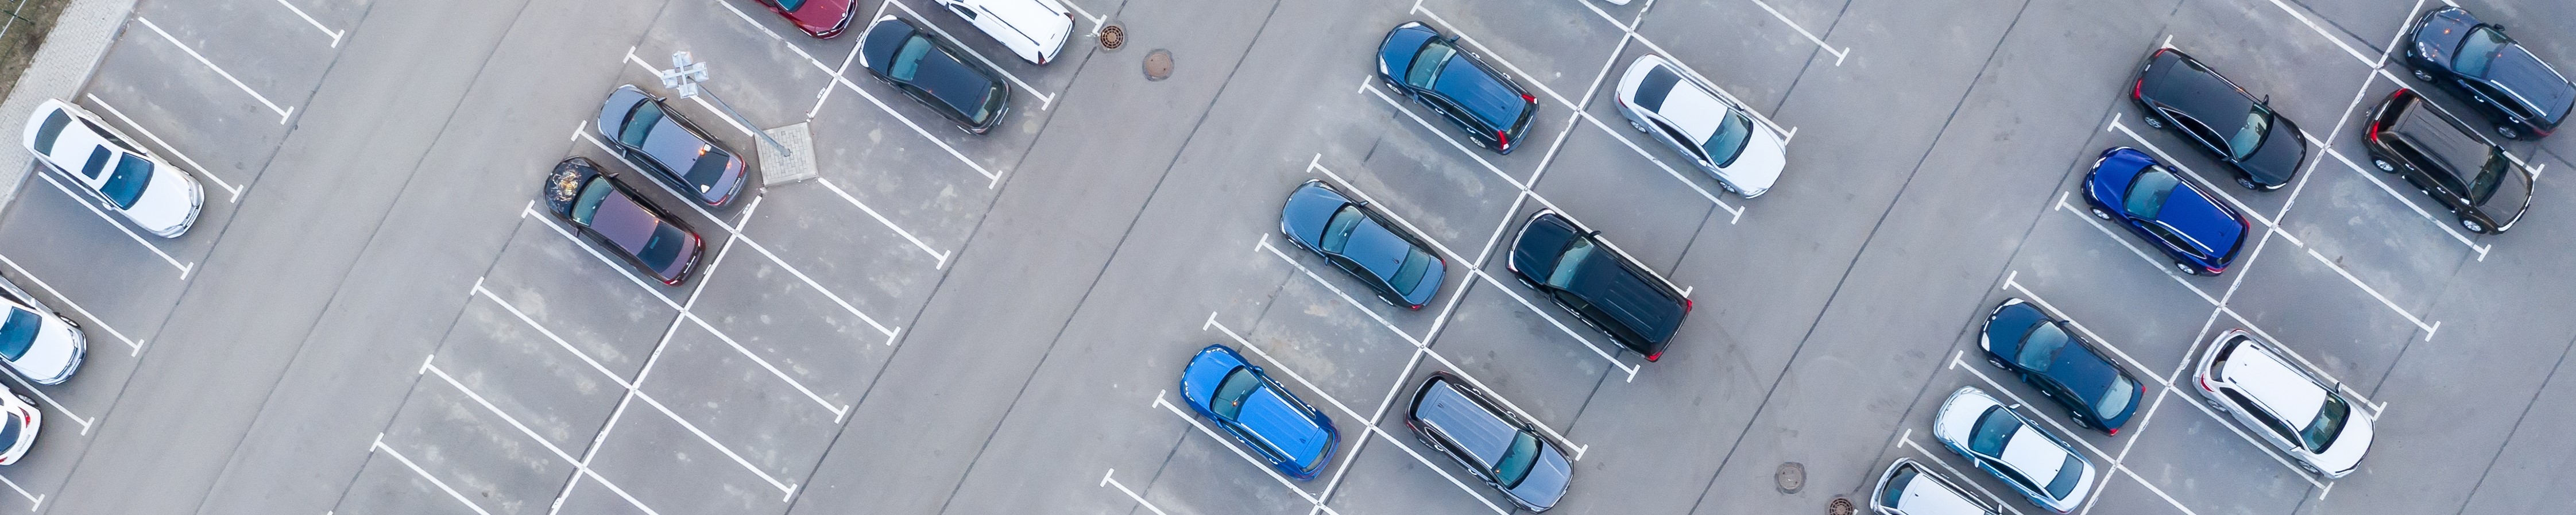 Overhead view of partially empty car lot